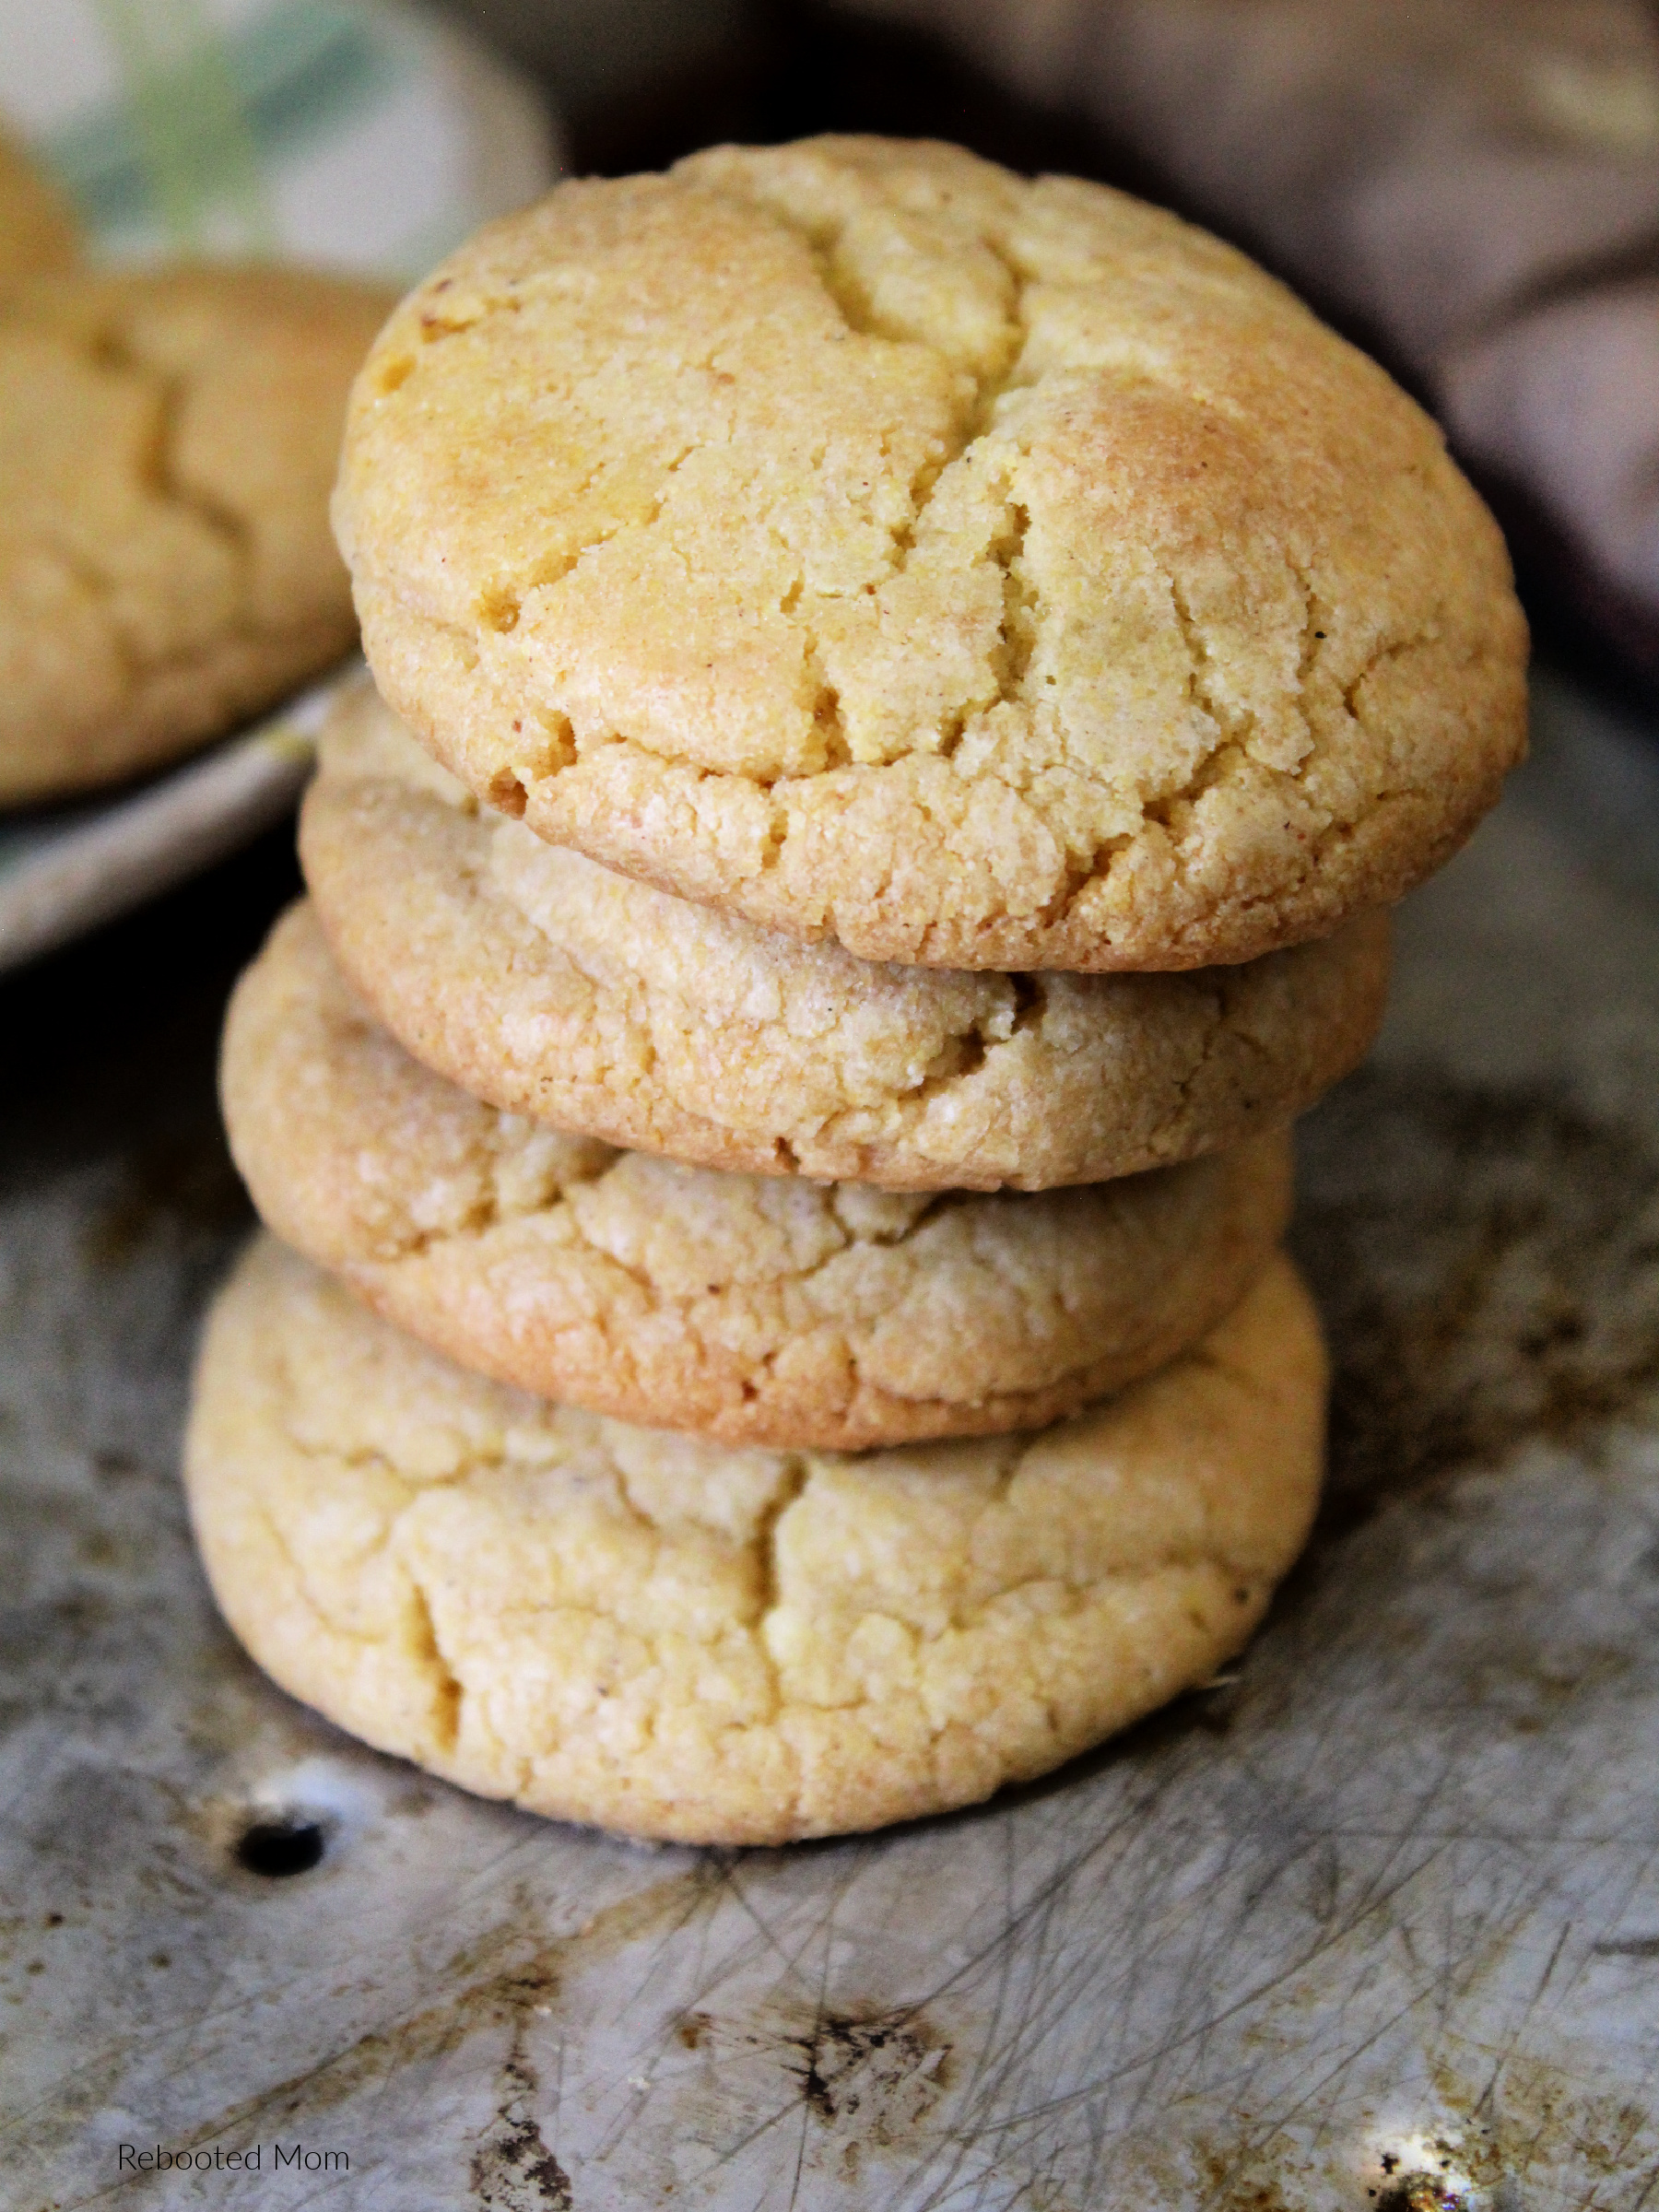 Find out how to make the most perfect cornmeal cookies - a delicious corn flavor in a pillowy cookie with a soft middle! A favorite for all!